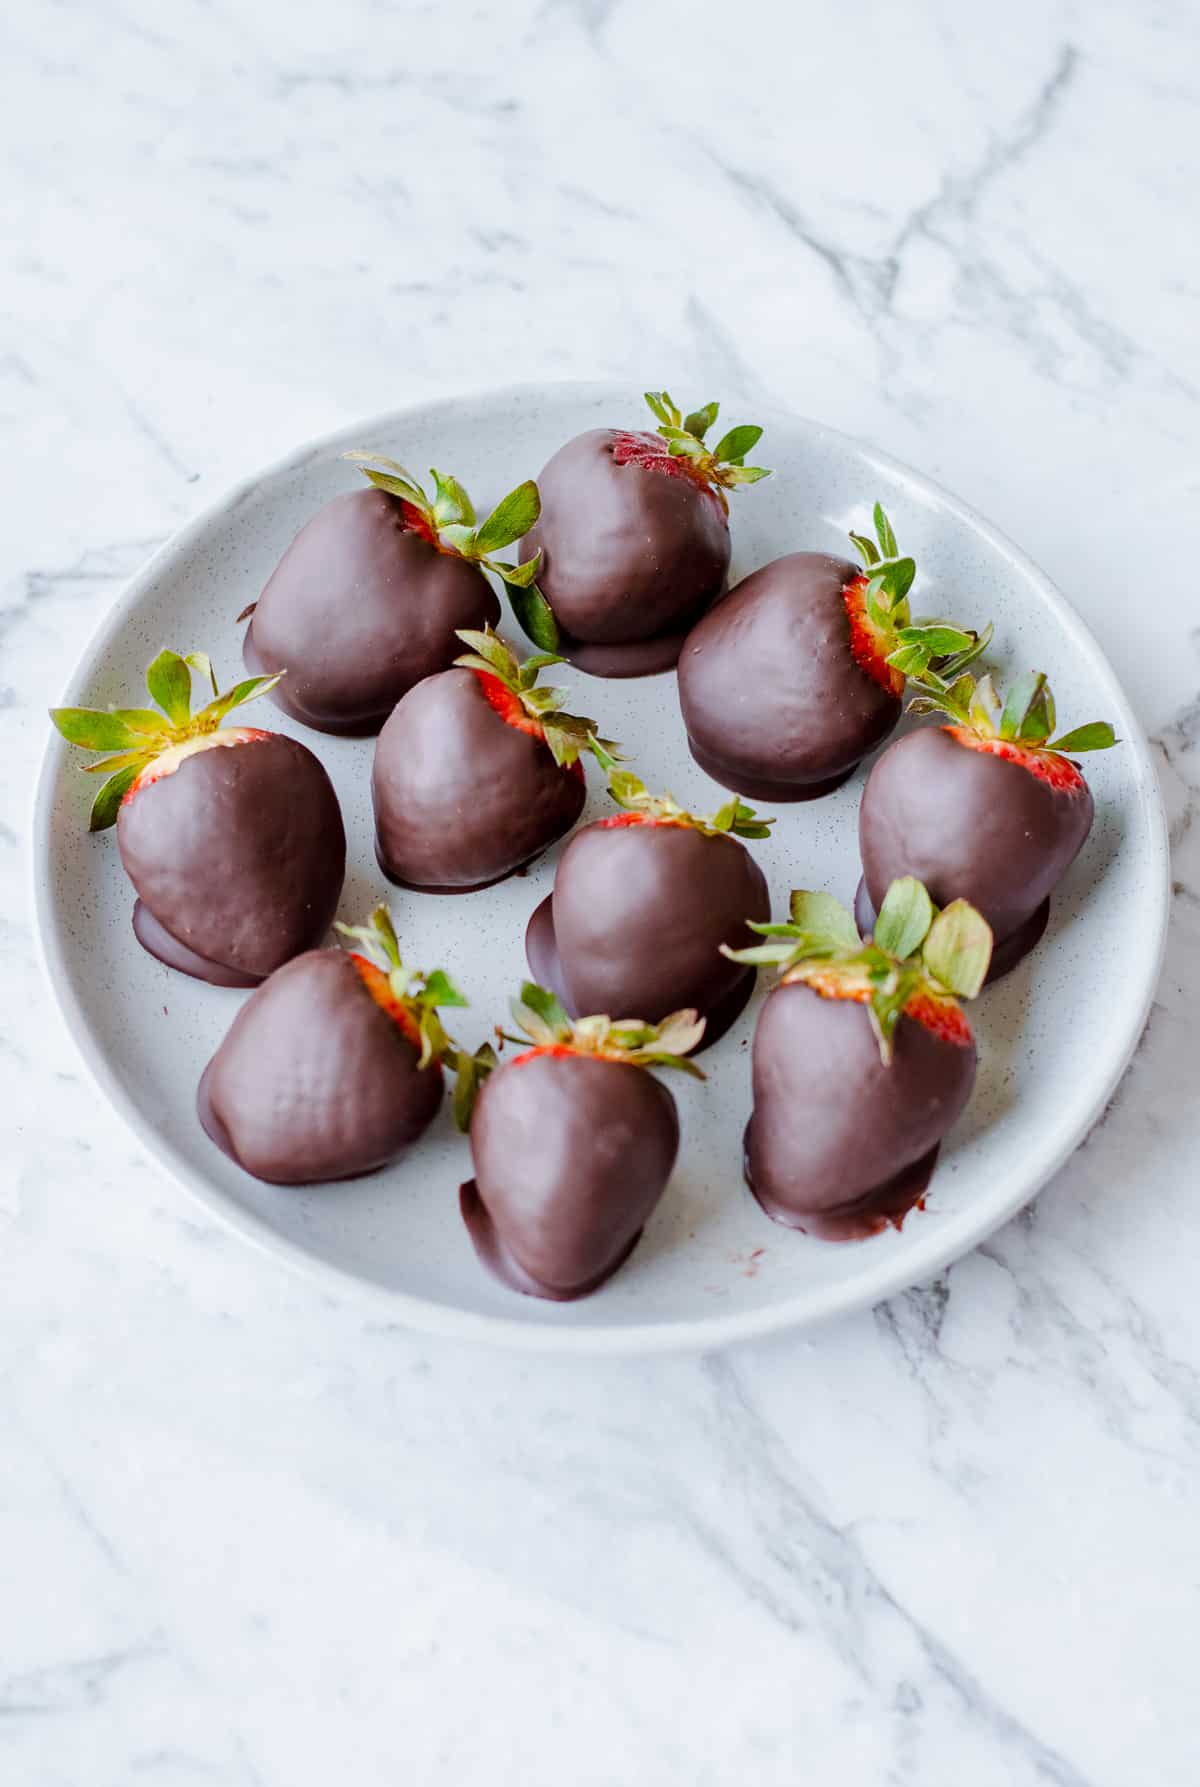 Chocolate dipped strawberries on a grey plate.